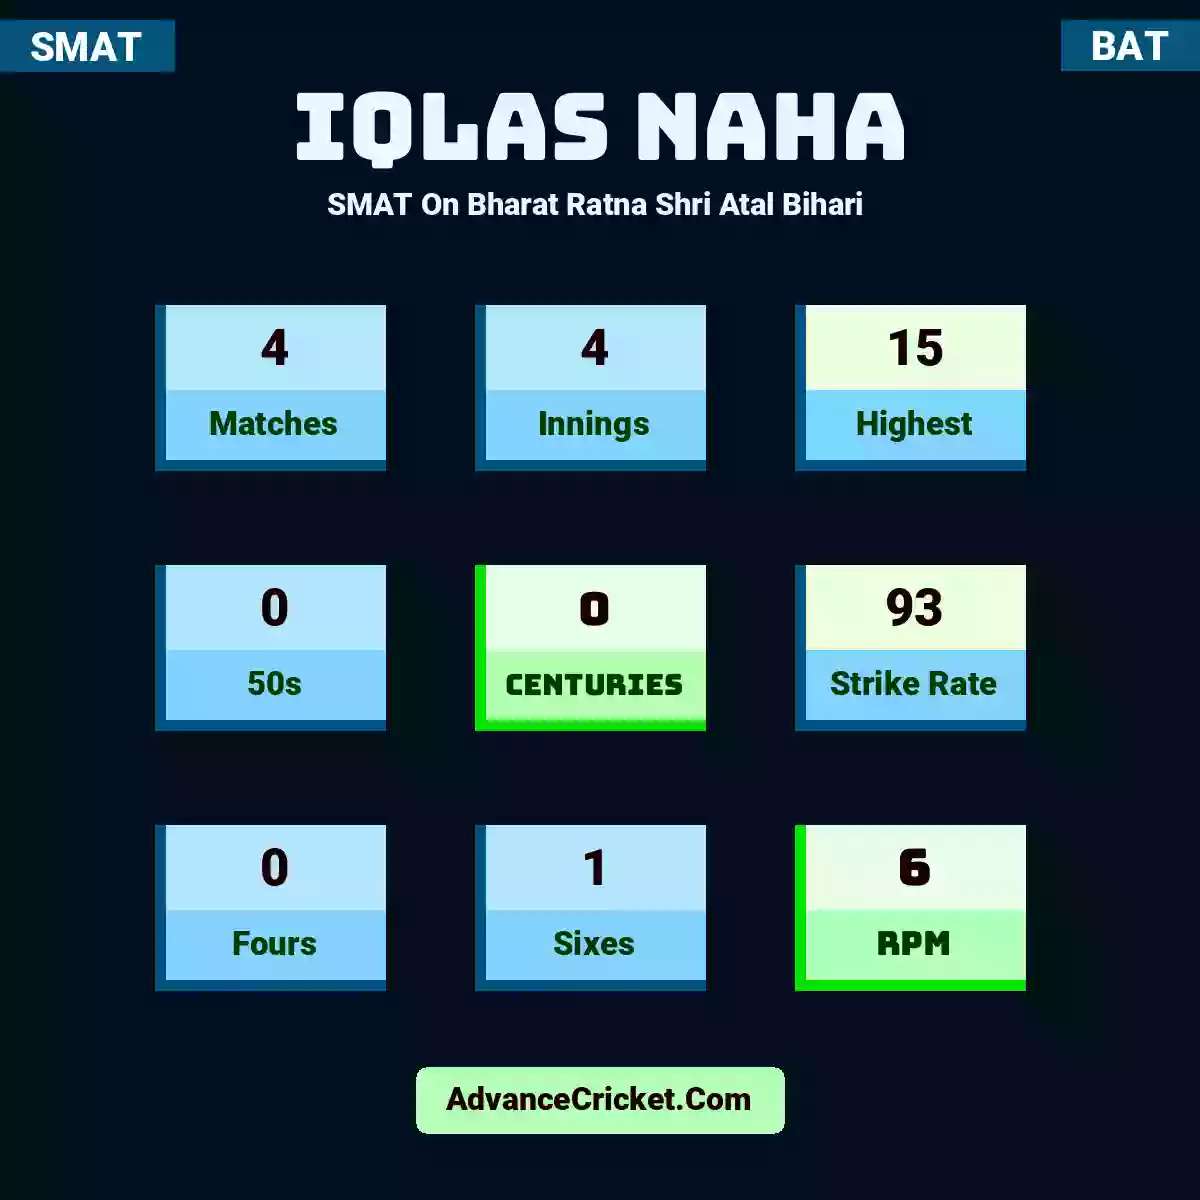 Iqlas Naha SMAT  On Bharat Ratna Shri Atal Bihari , Iqlas Naha played 4 matches, scored 15 runs as highest, 0 half-centuries, and 0 centuries, with a strike rate of 93. I.Naha hit 0 fours and 1 sixes, with an RPM of 6.